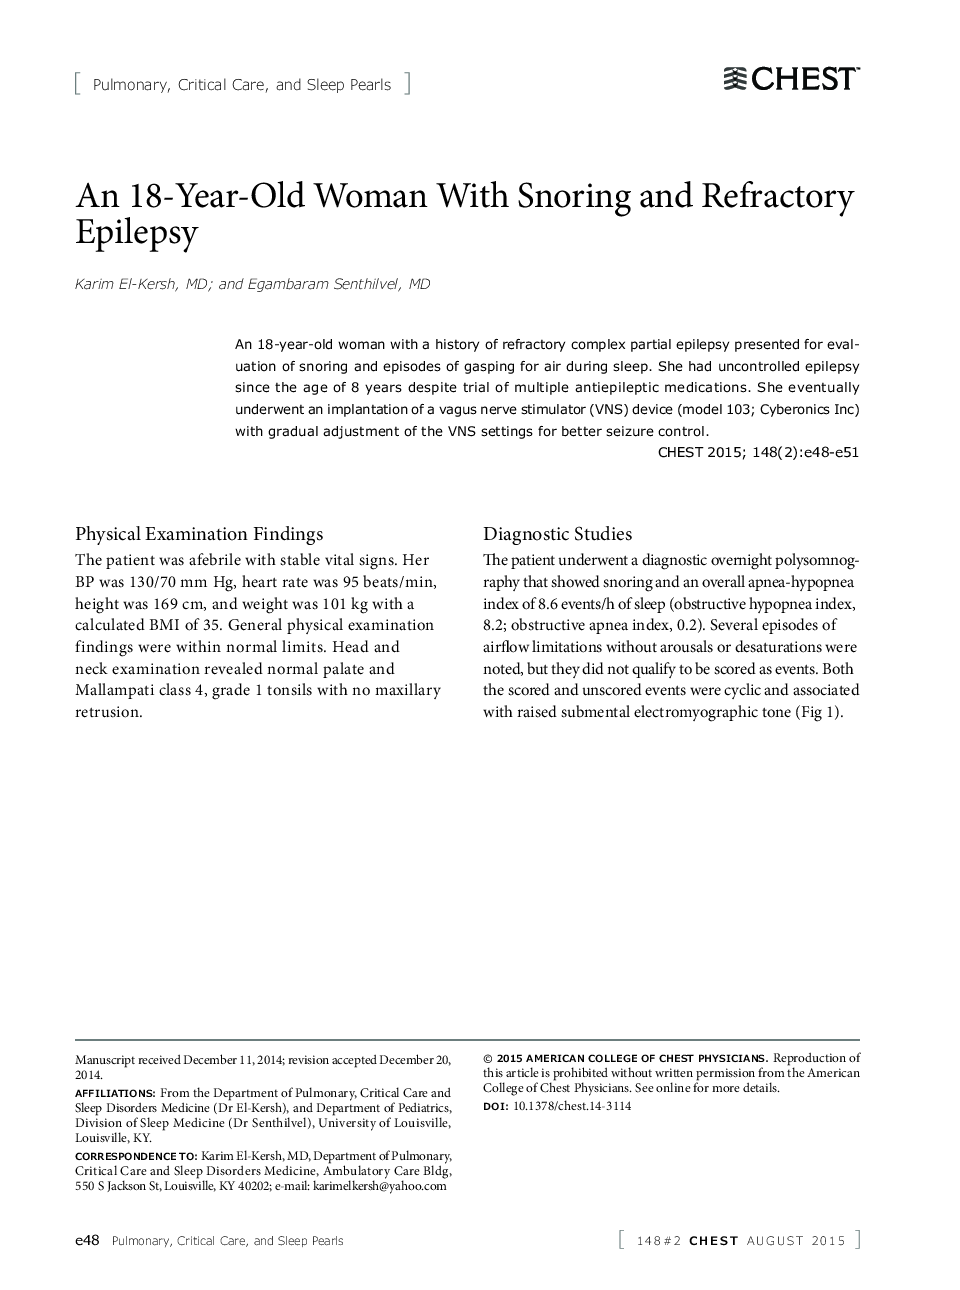 An 18-Year-Old Woman With Snoring and Refractory Epilepsy